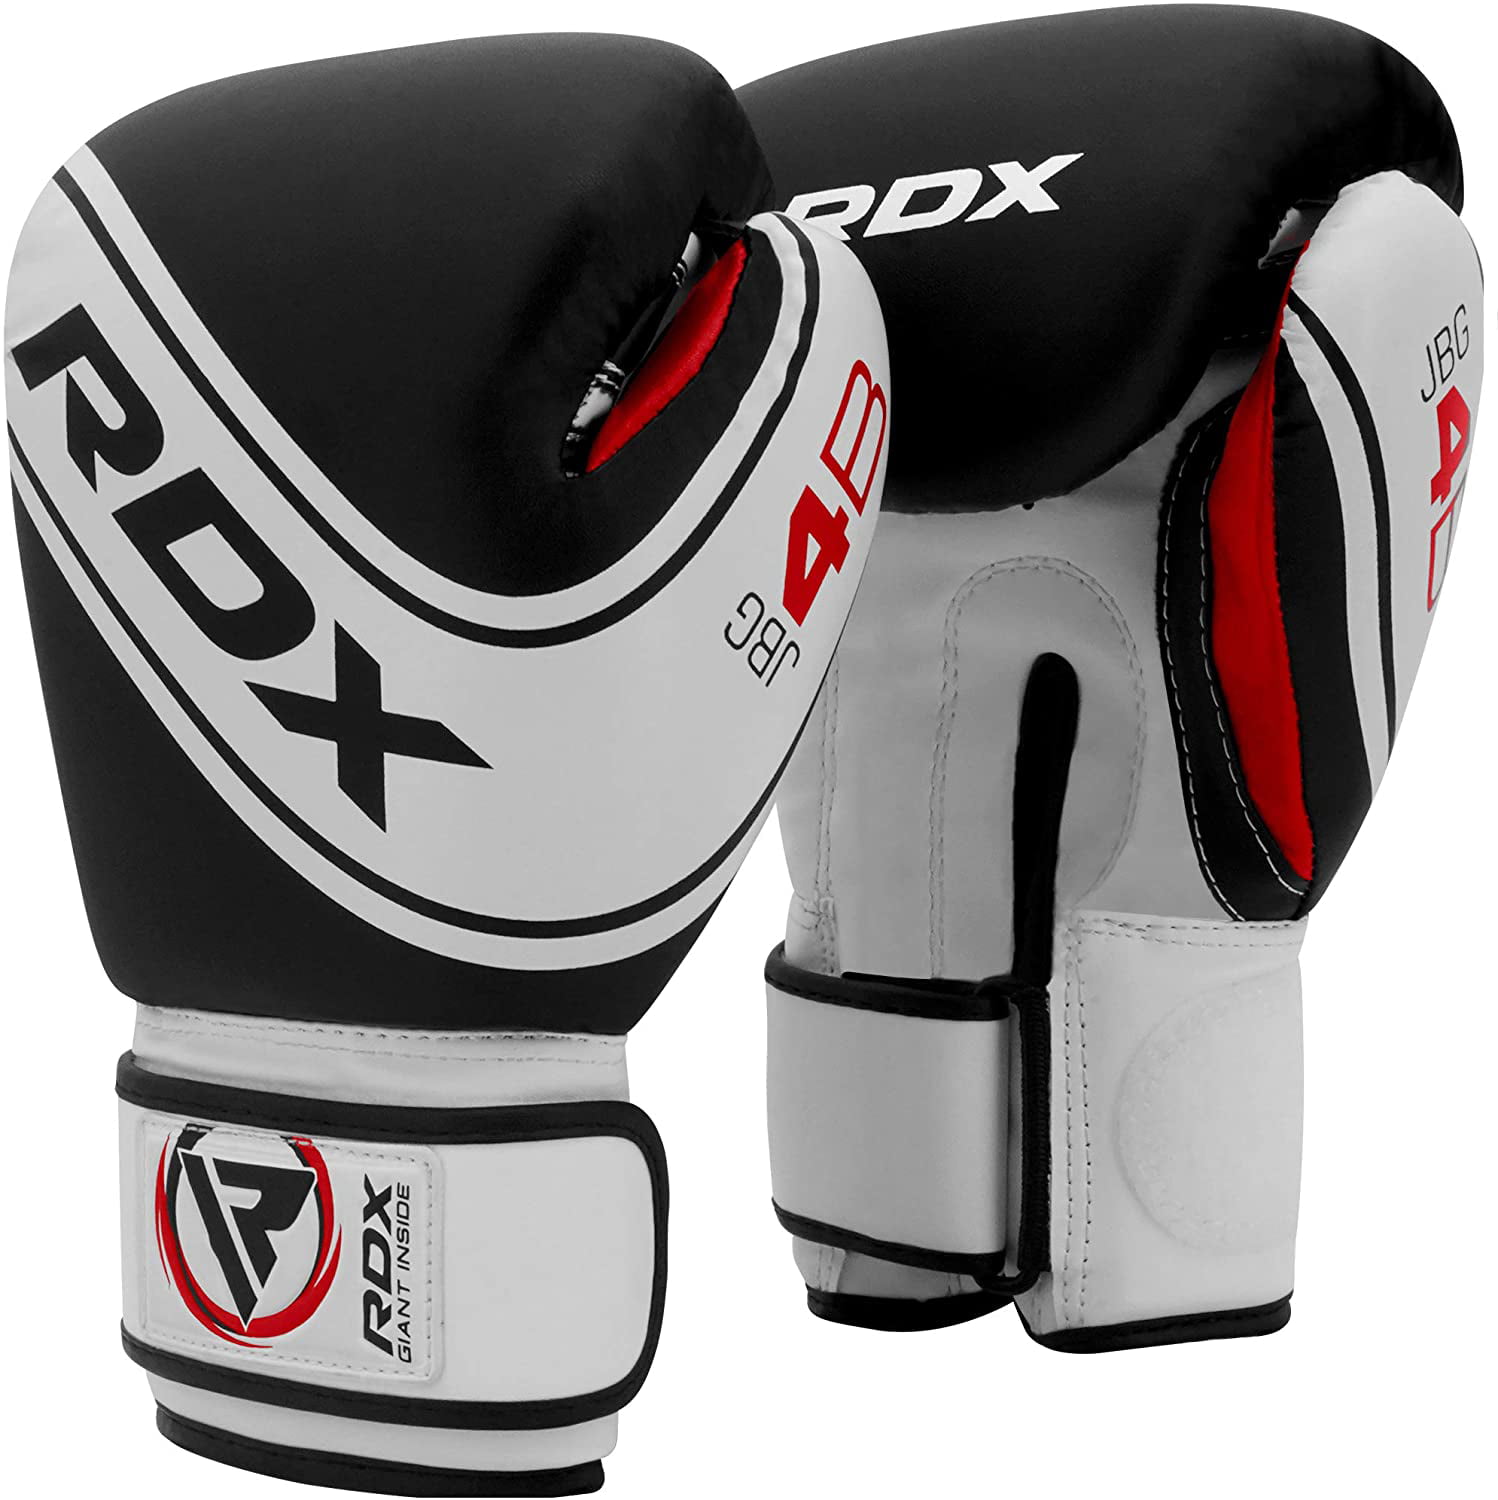 Kids Boxing Gloves 6oz Junior Training Punch MMA Bag Mitts Kick Boxing Exercise 